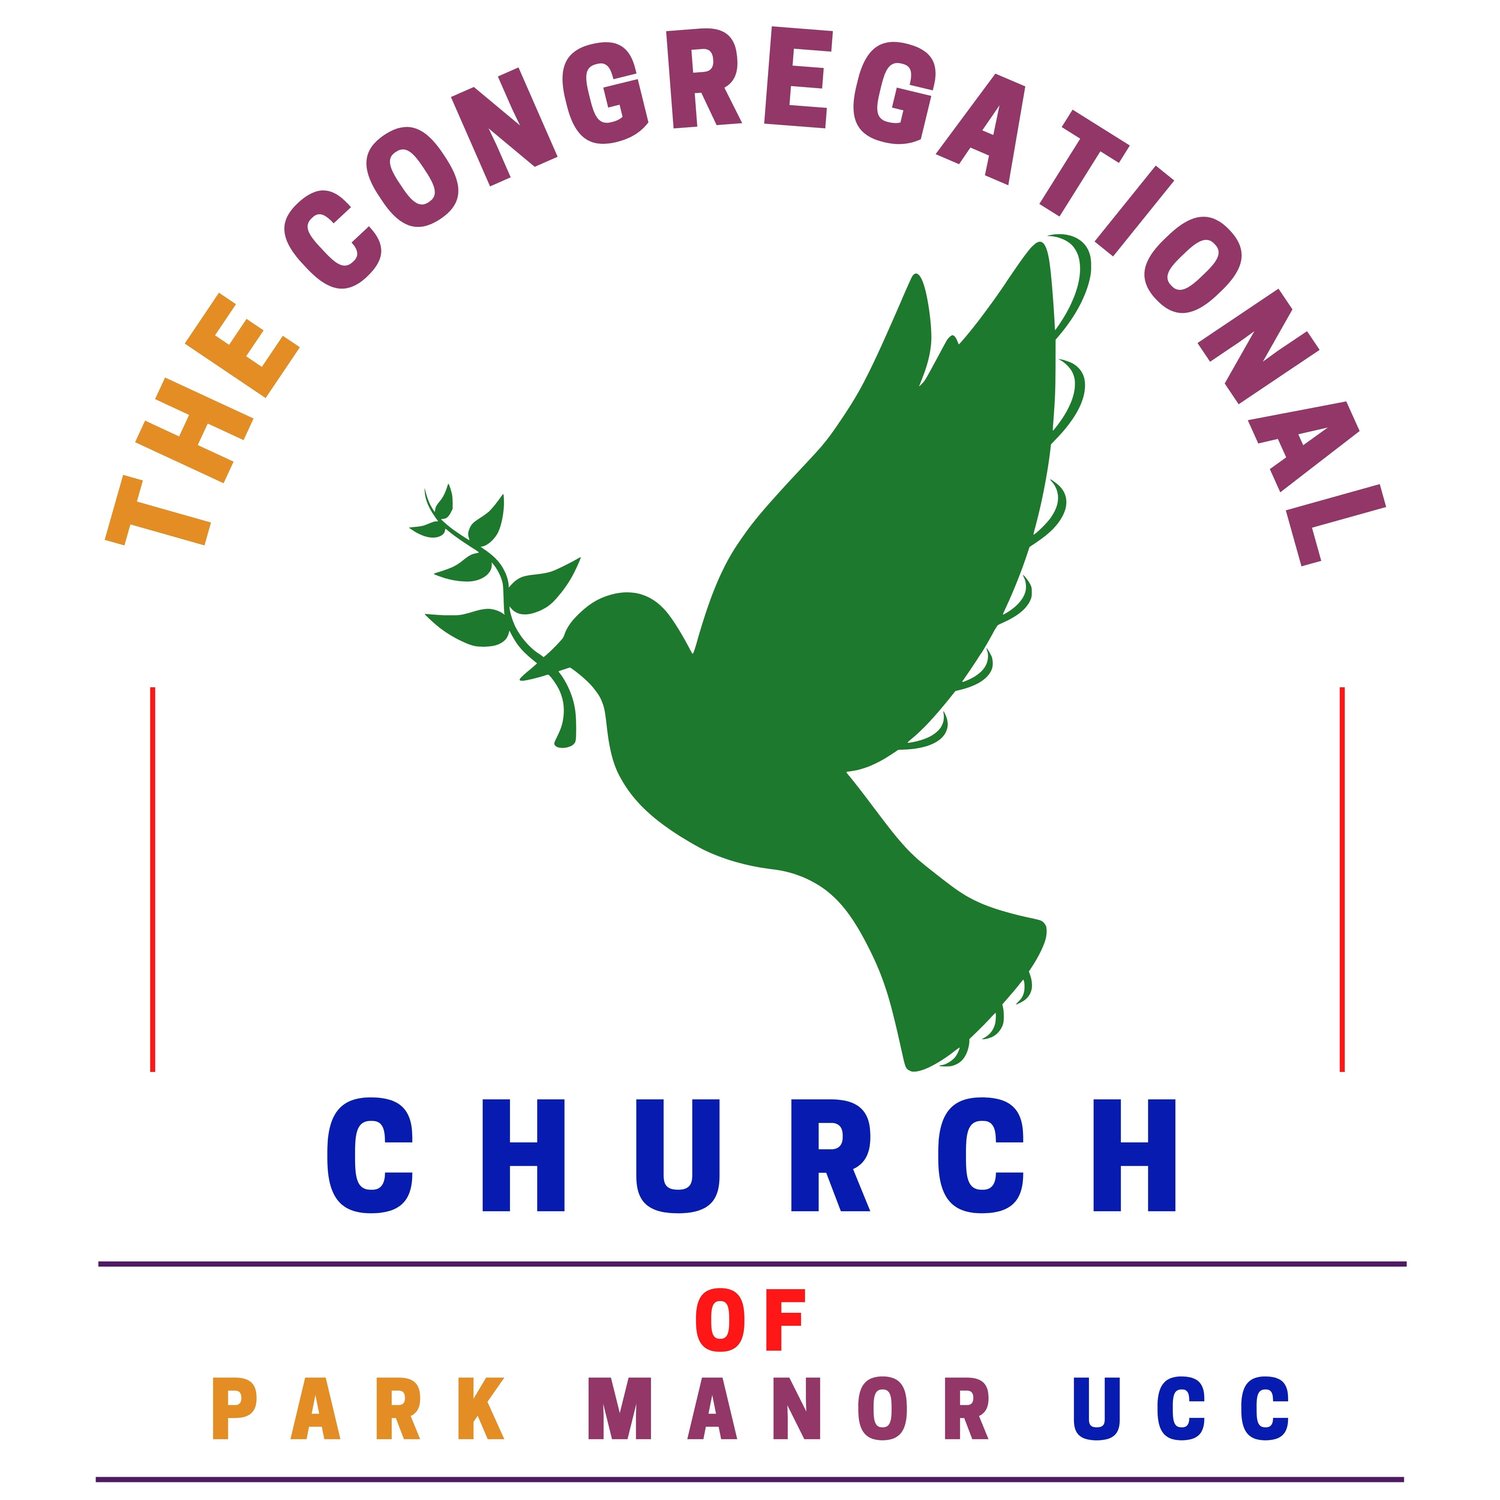 The Congregational Church of Park Manor, UCC